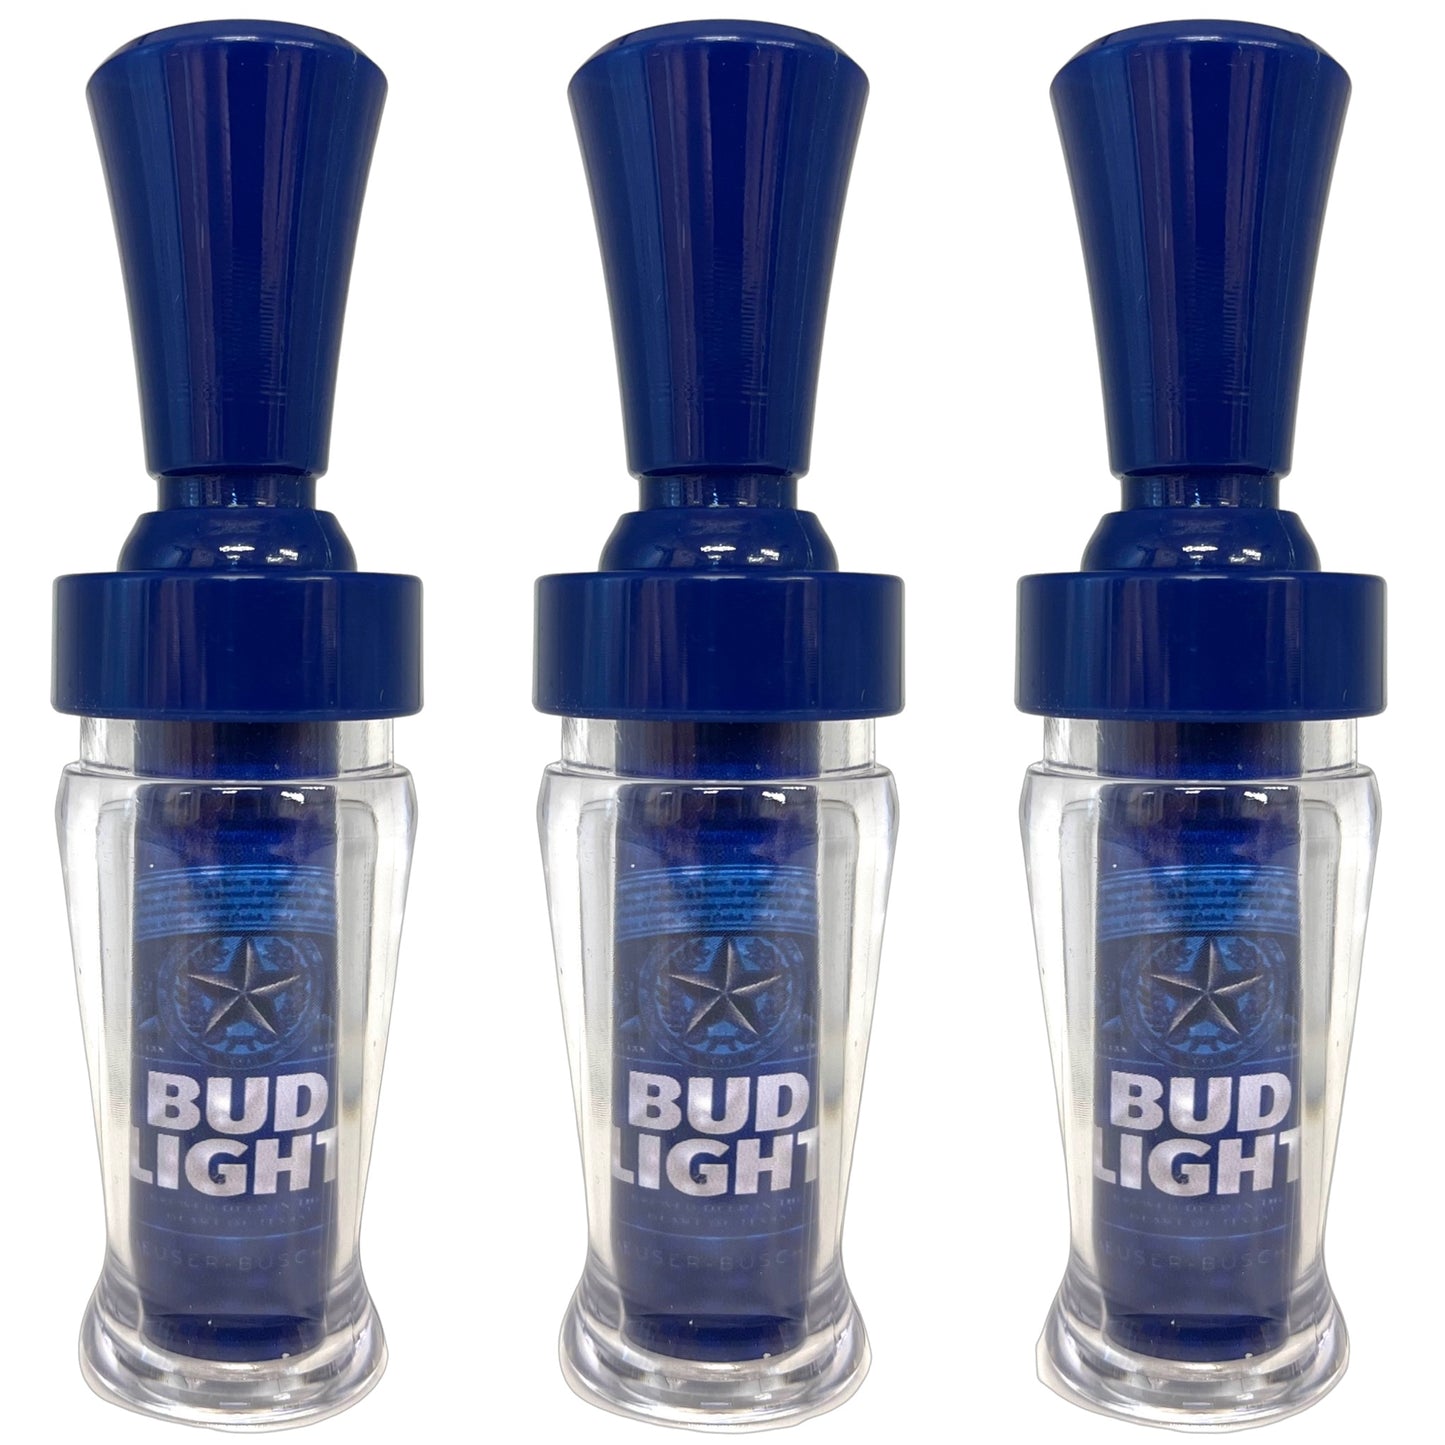 POLYCARBONATE IMAGE DUCK CALL BUD LIGHT